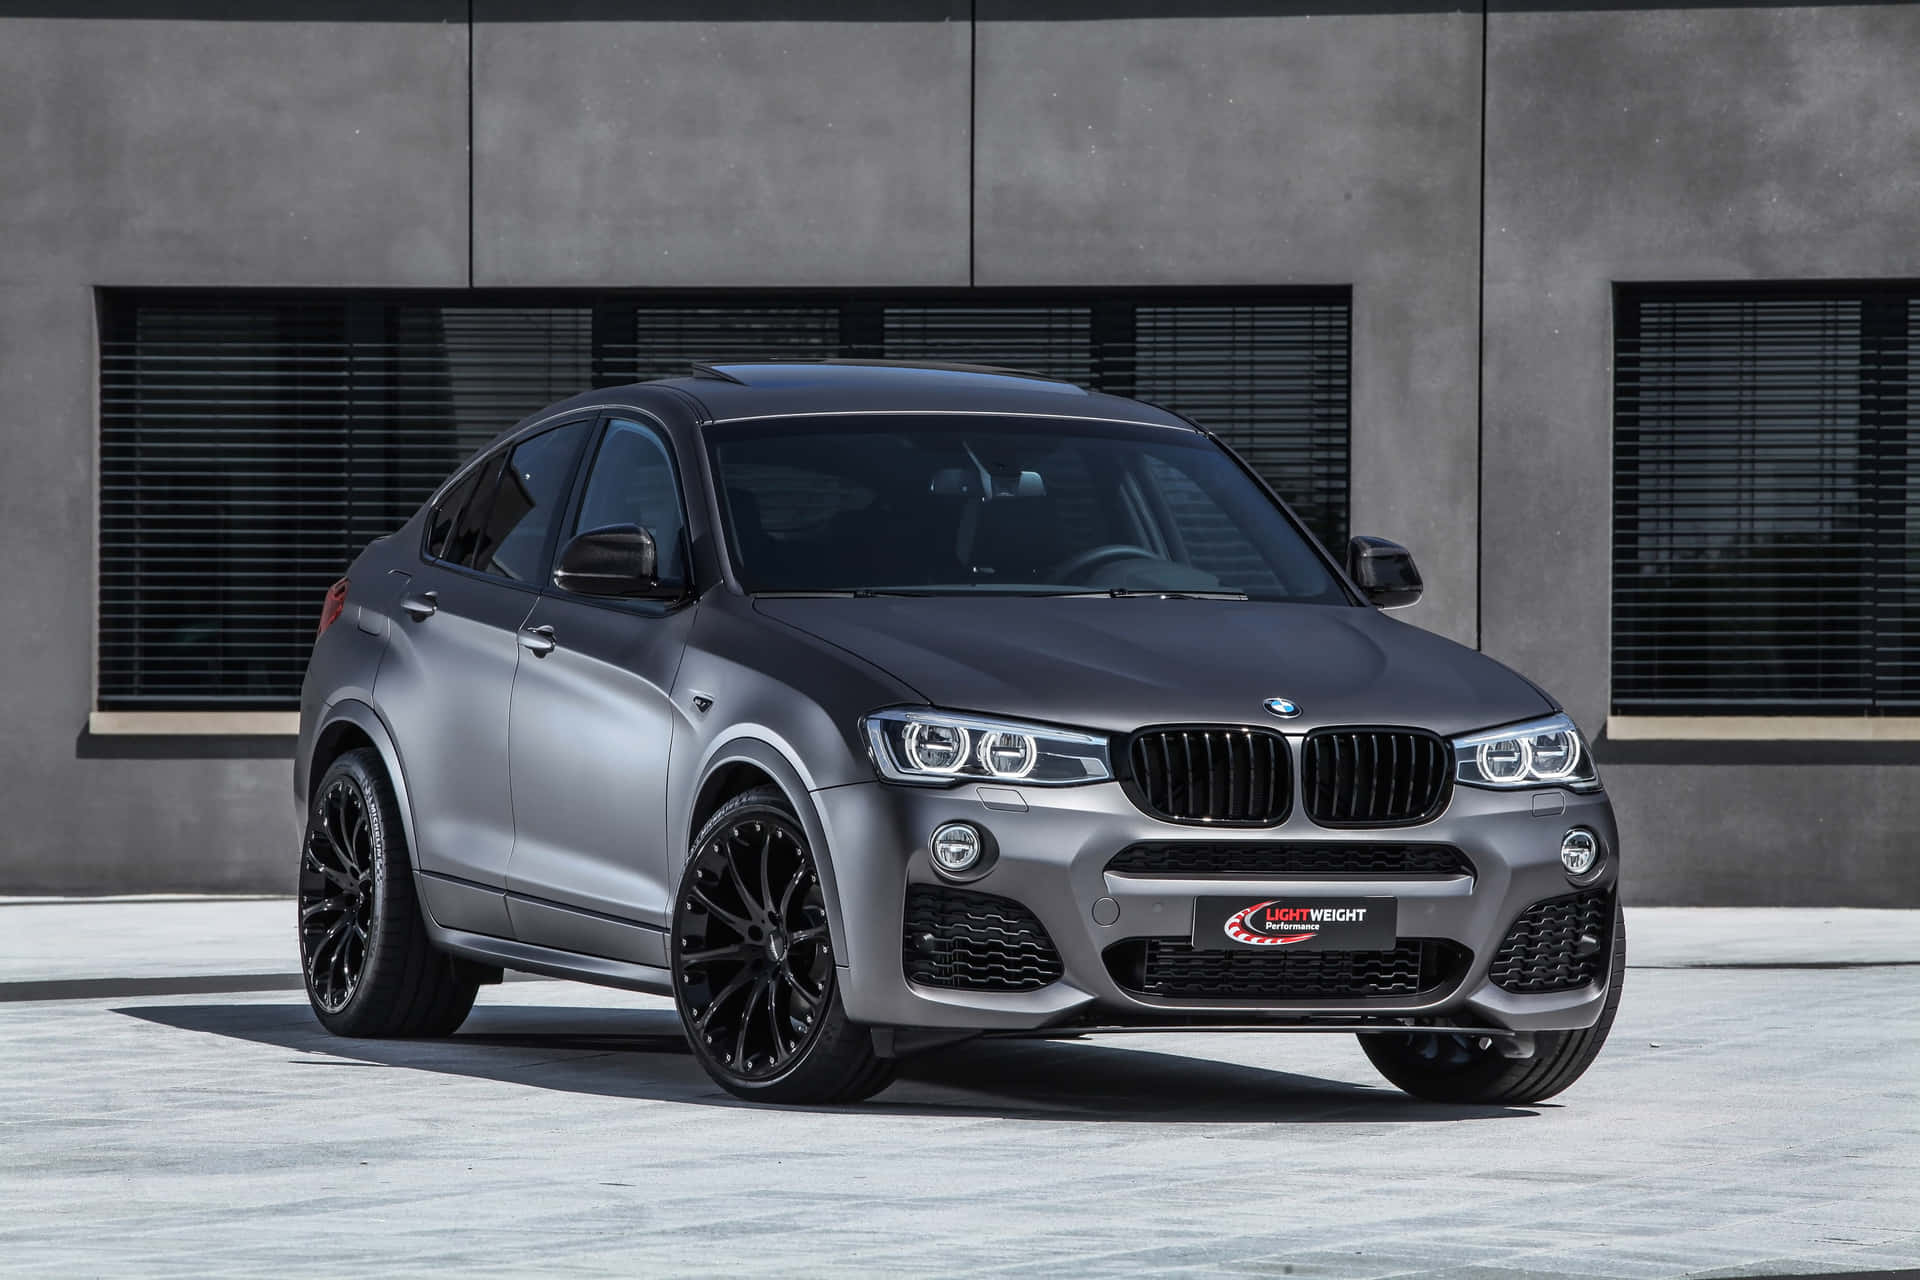 Sleek and Stylish BMW X4 in Action Wallpaper